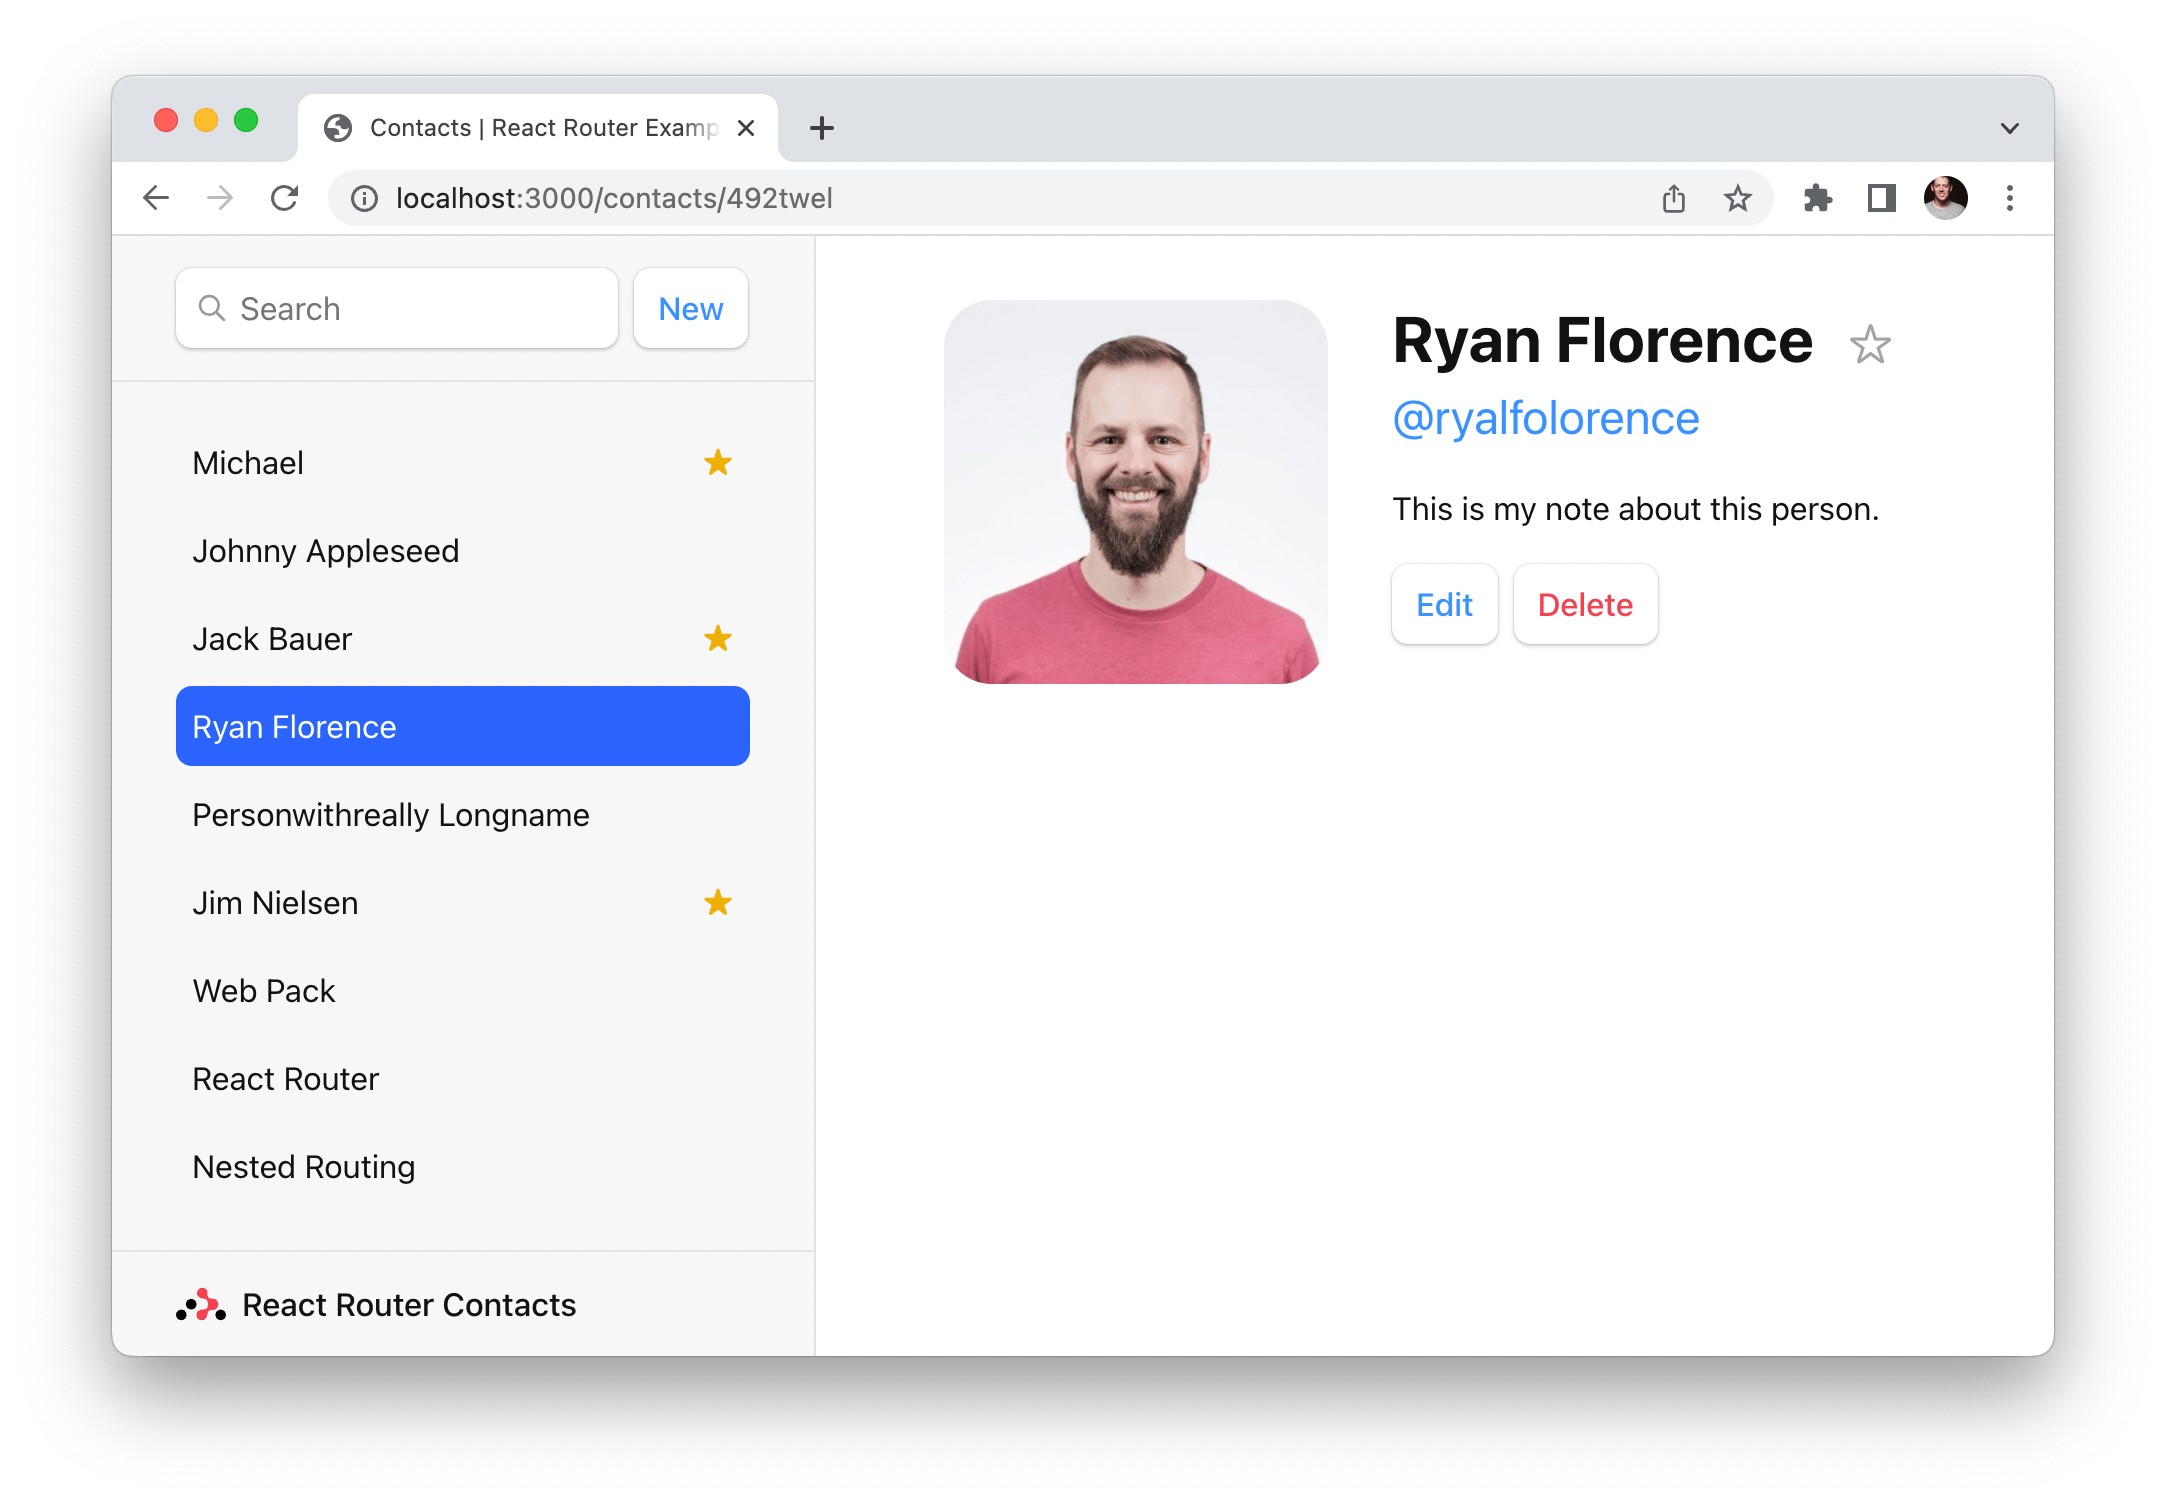 Screenshot of the profile page in the “Contacts” demo app for React Router.